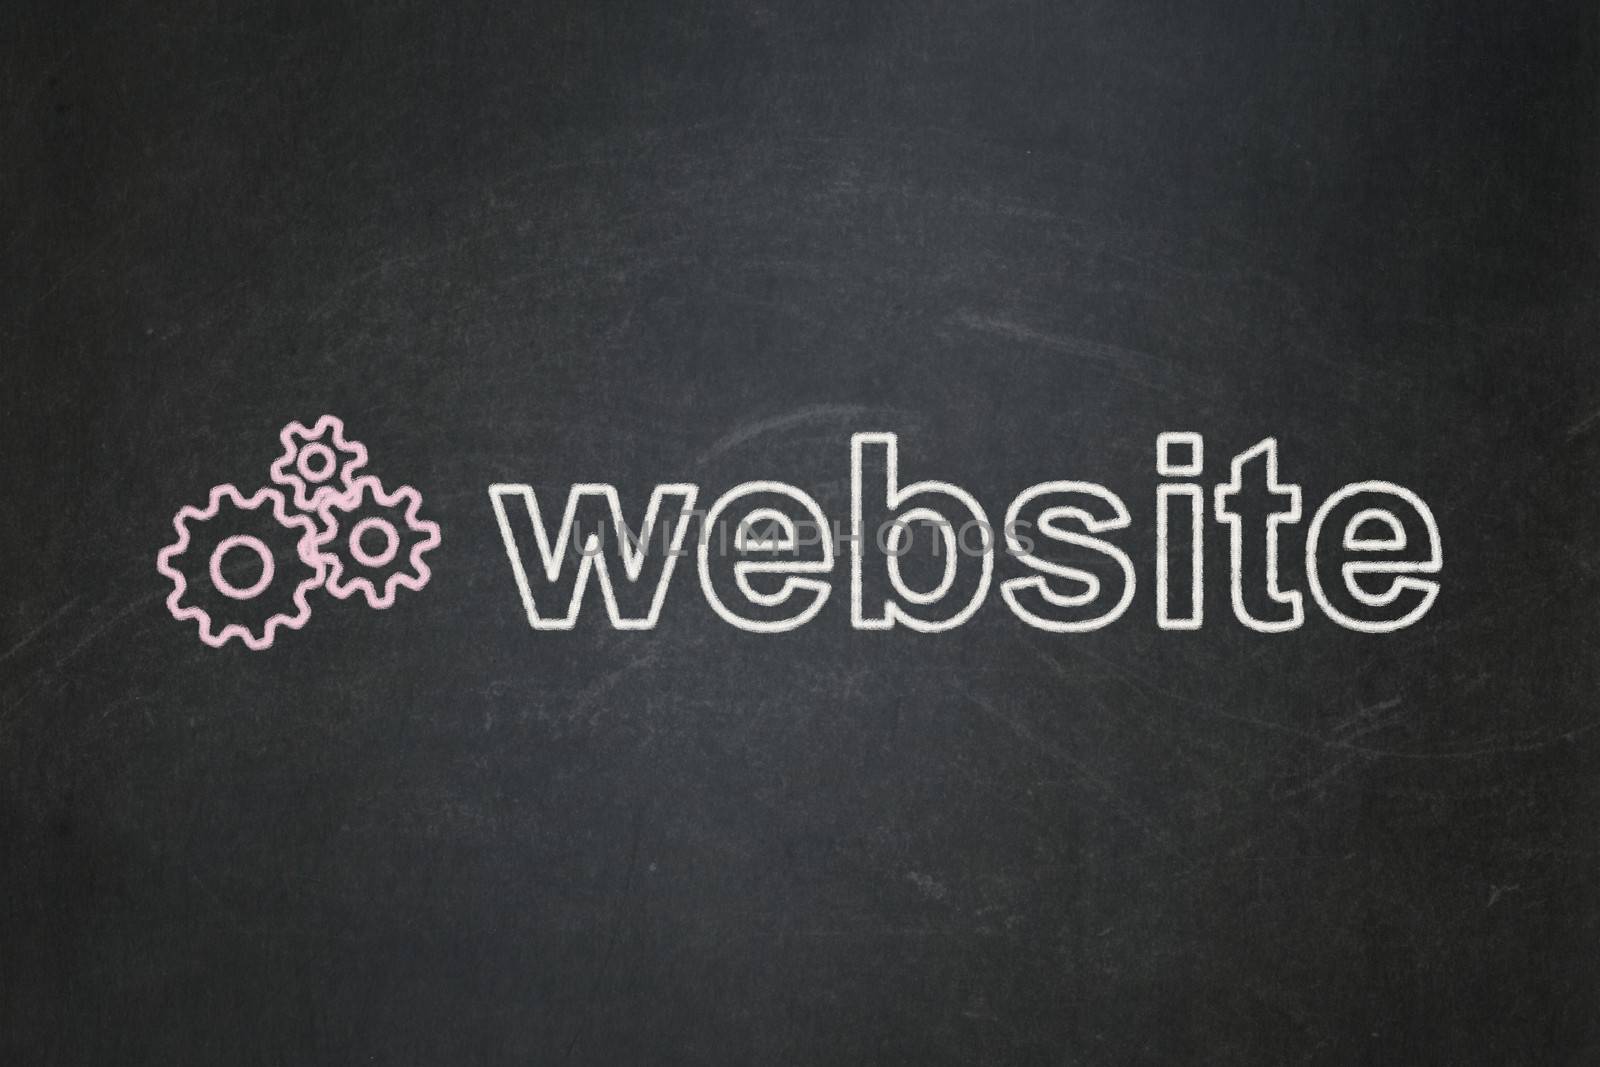 Web development concept: Gears icon and text Website on Black chalkboard background, 3d render